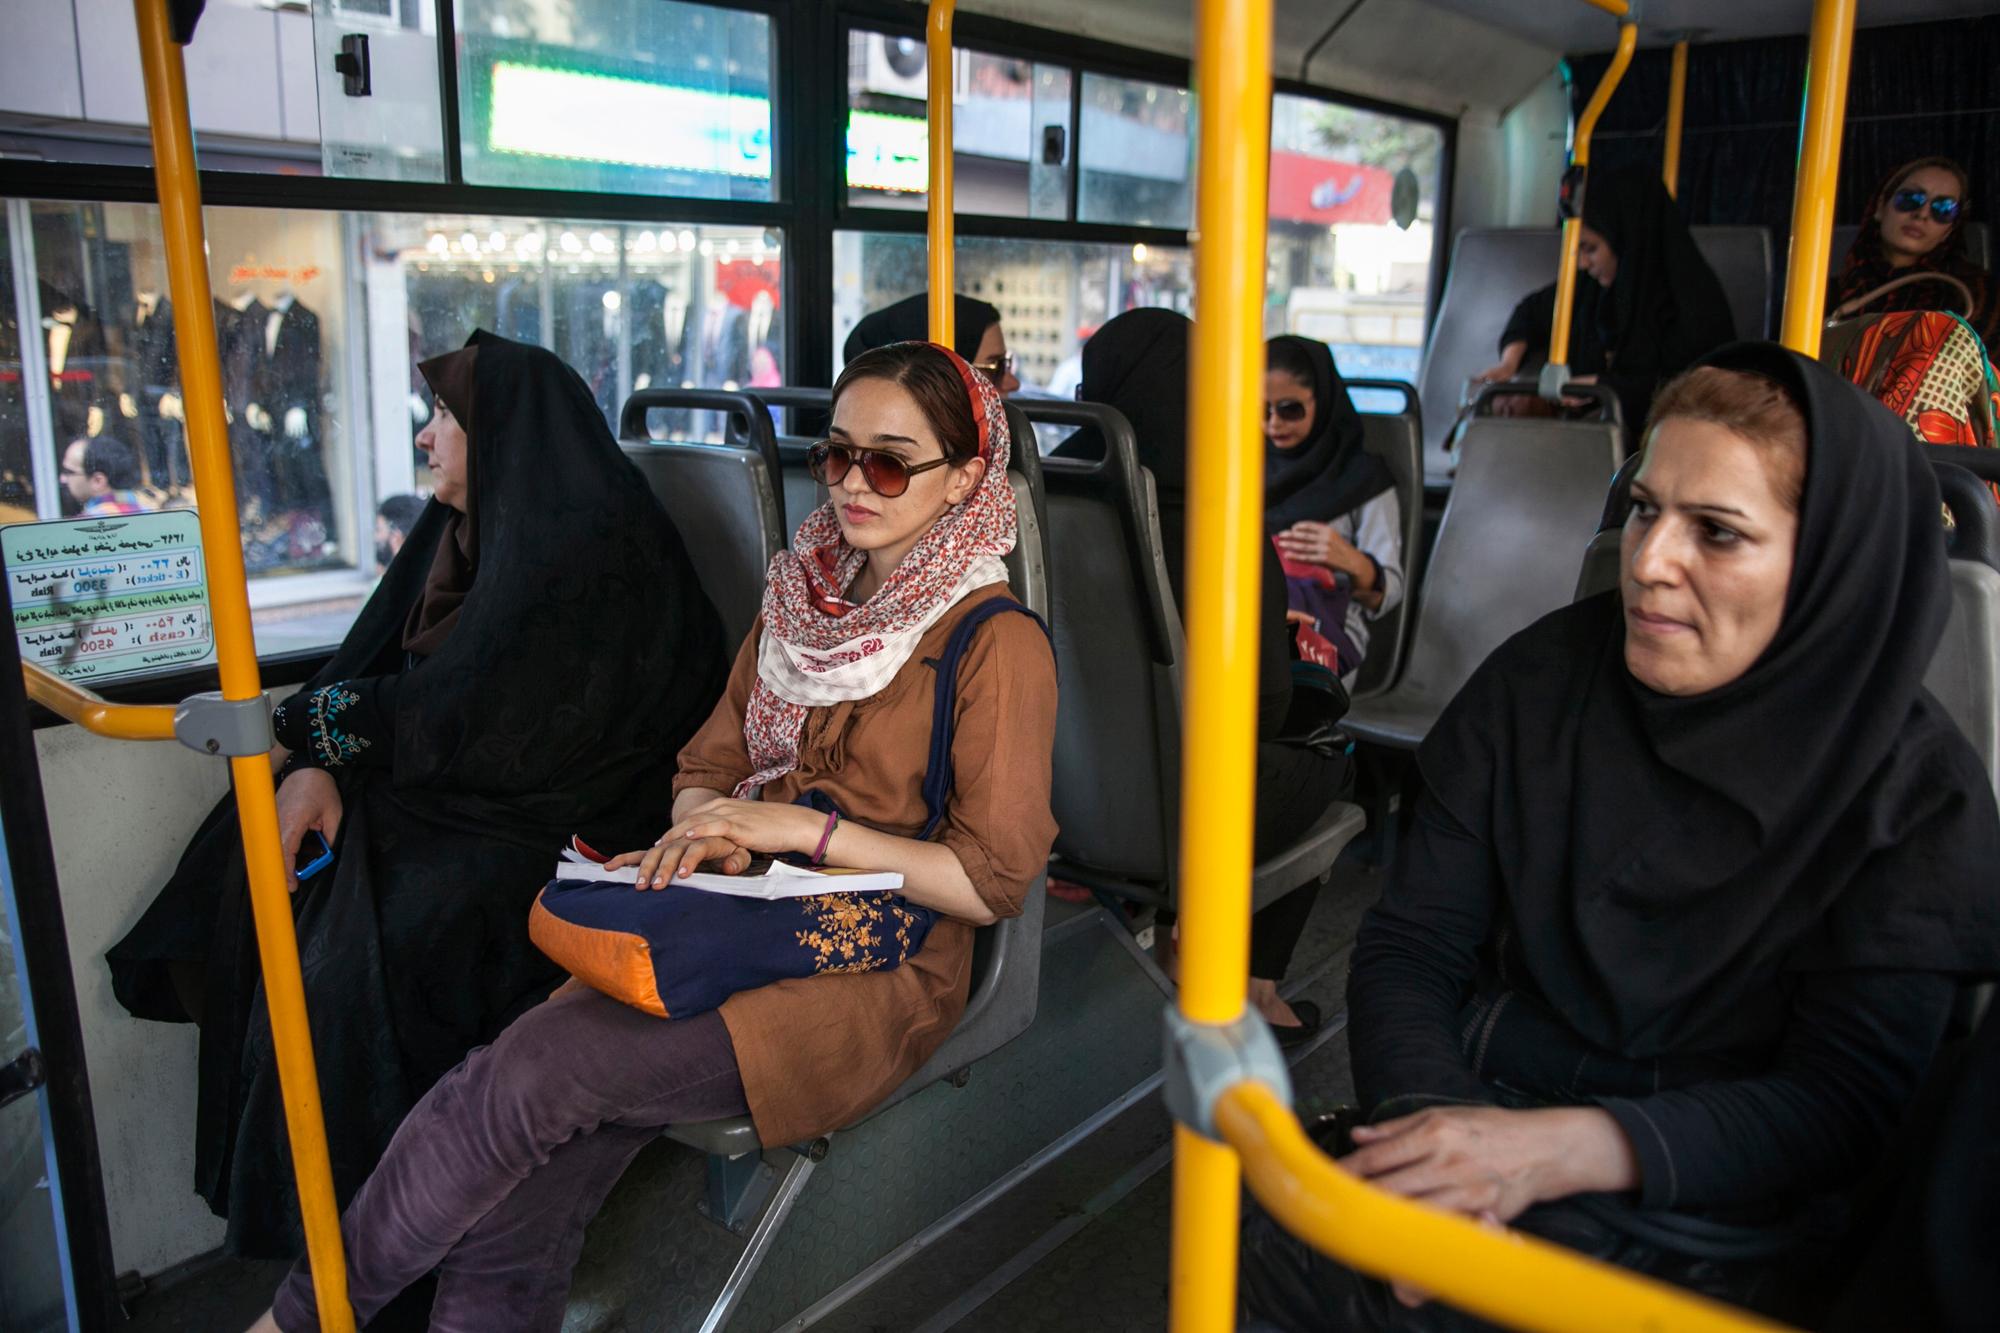 Tehran : the faces of women's empowerment - Mahsa has a hard time finding her place in this society...